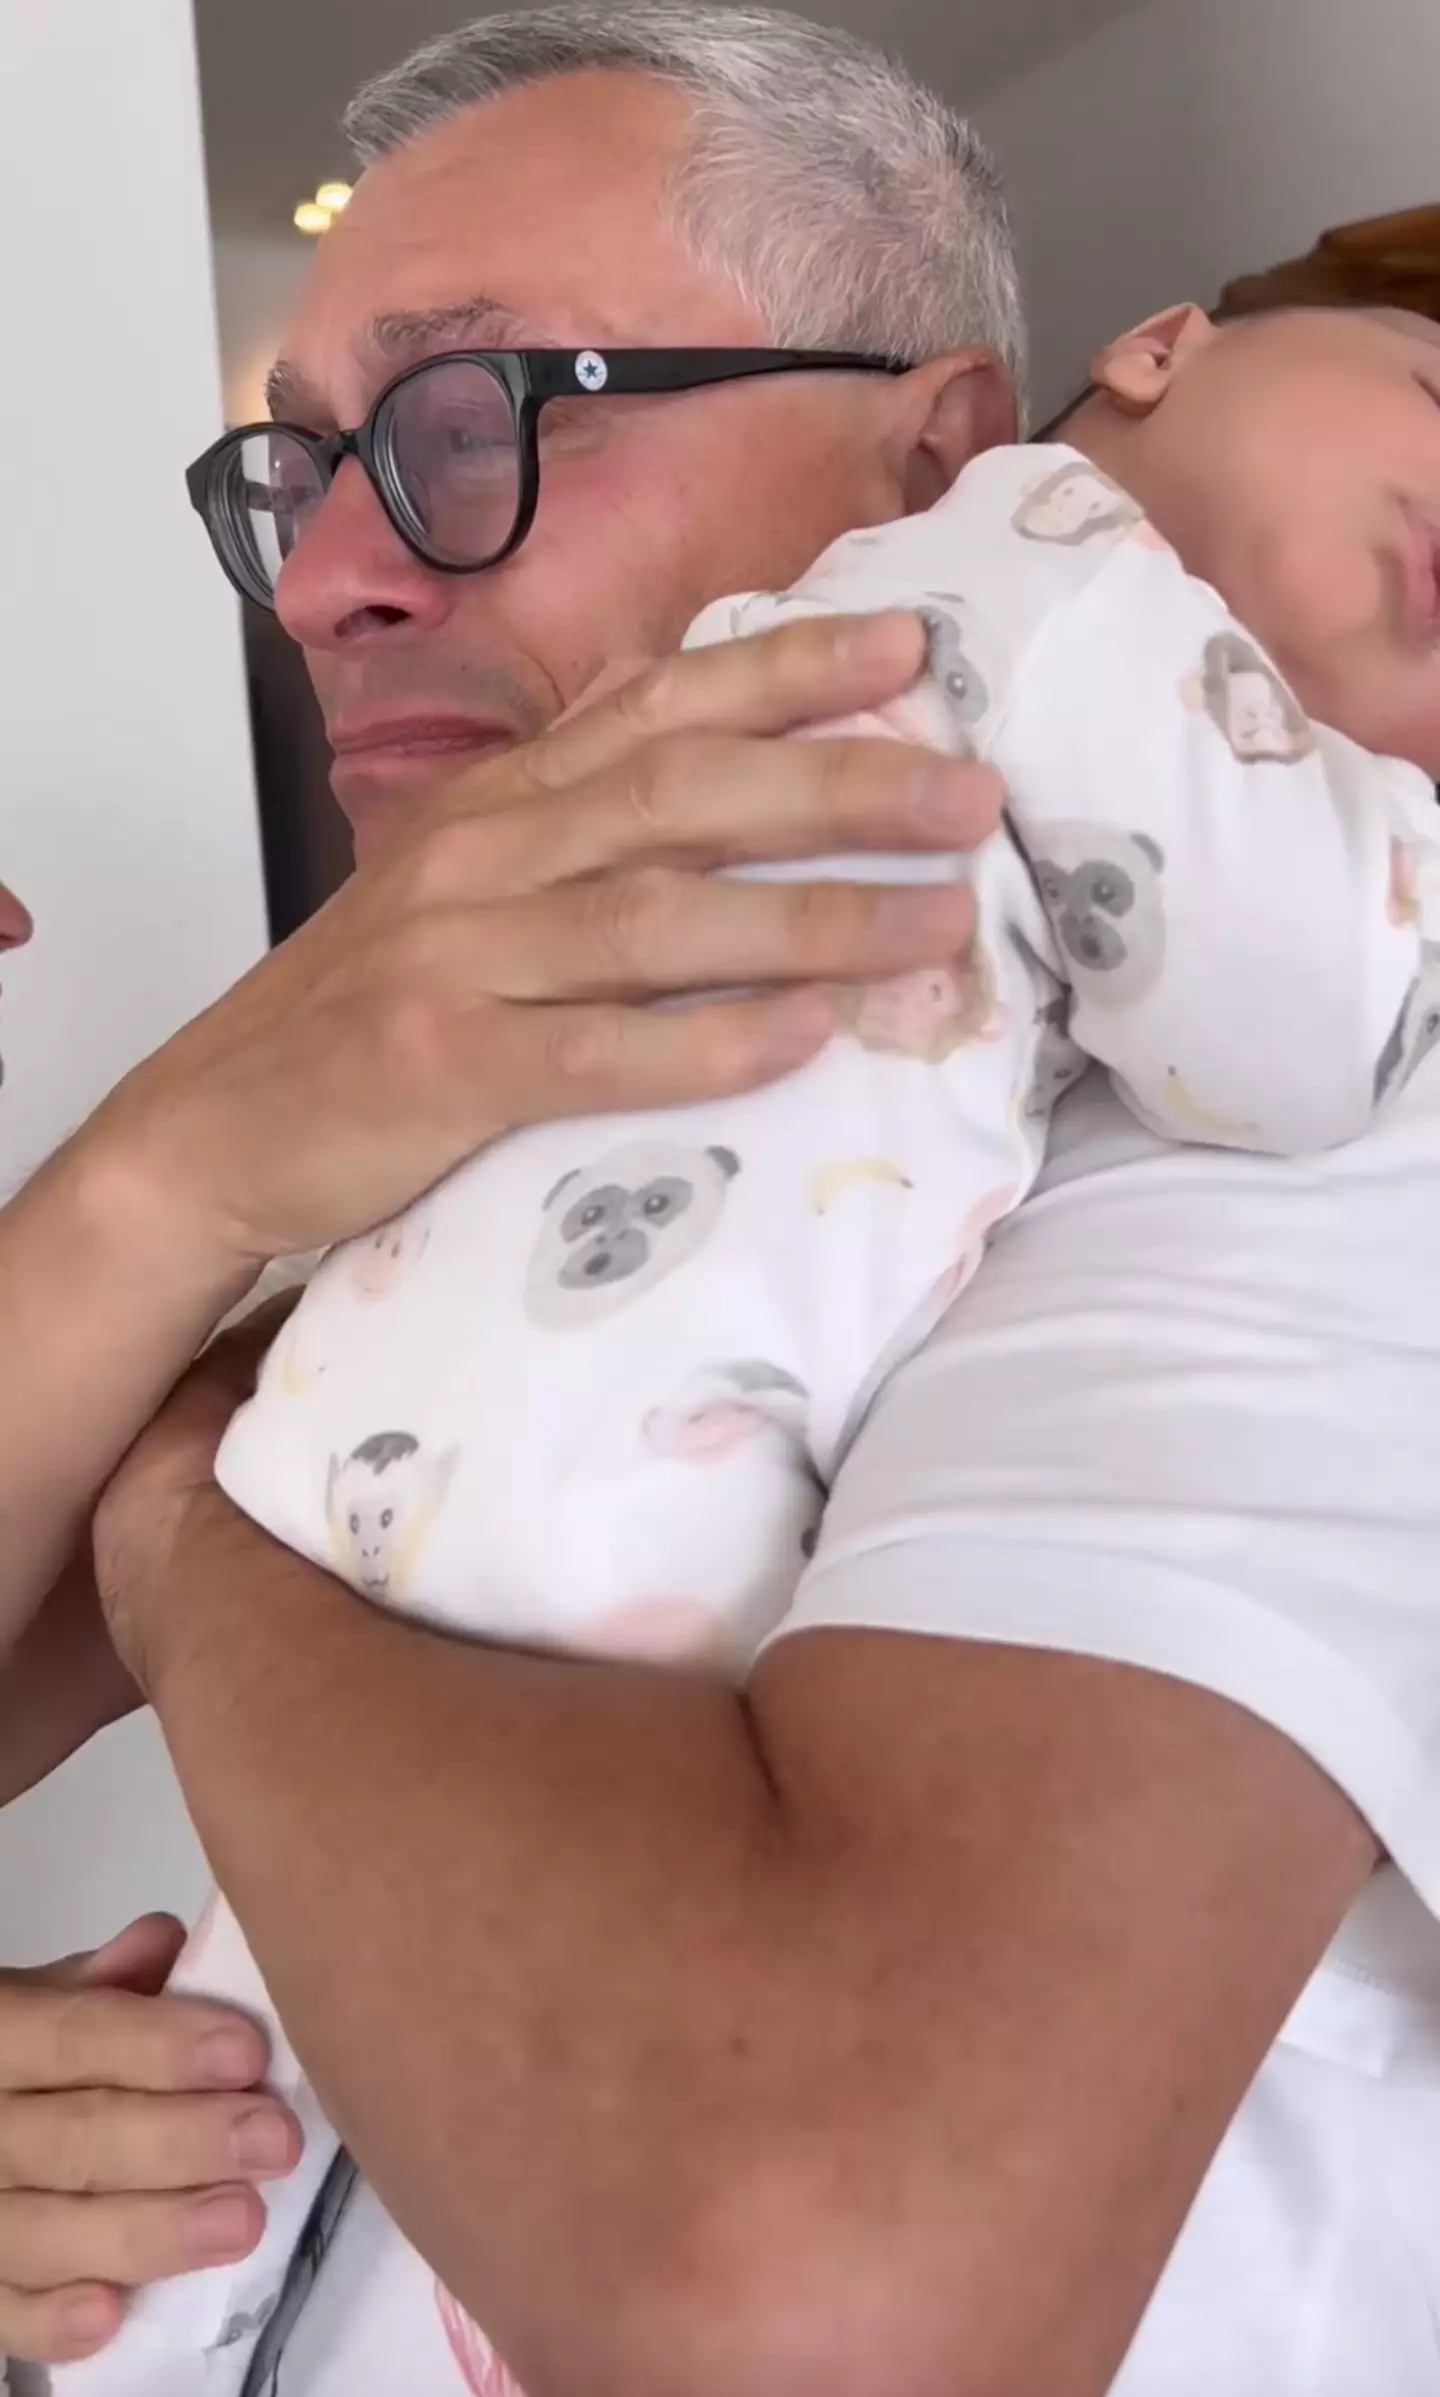 Jessie J’s dad appeared to be overcome with emotion while cuddling his new grandson.